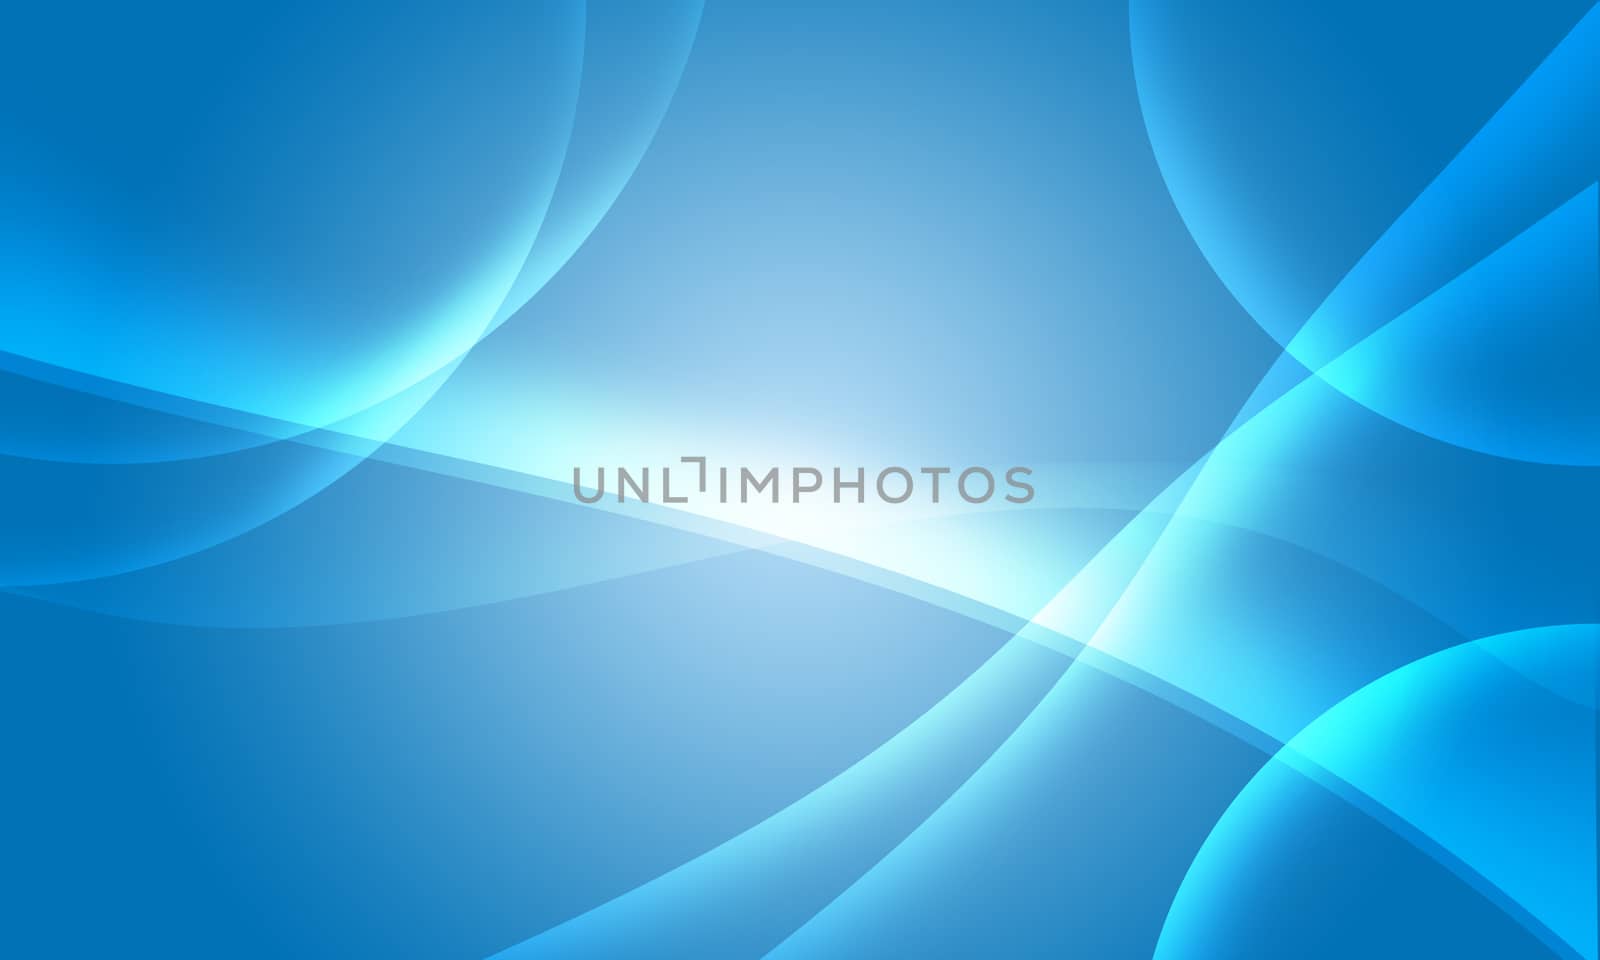 Aqua abstract background. Blue abstract backgrounds collection created in hi-resolution suitable for background, web banner or design element